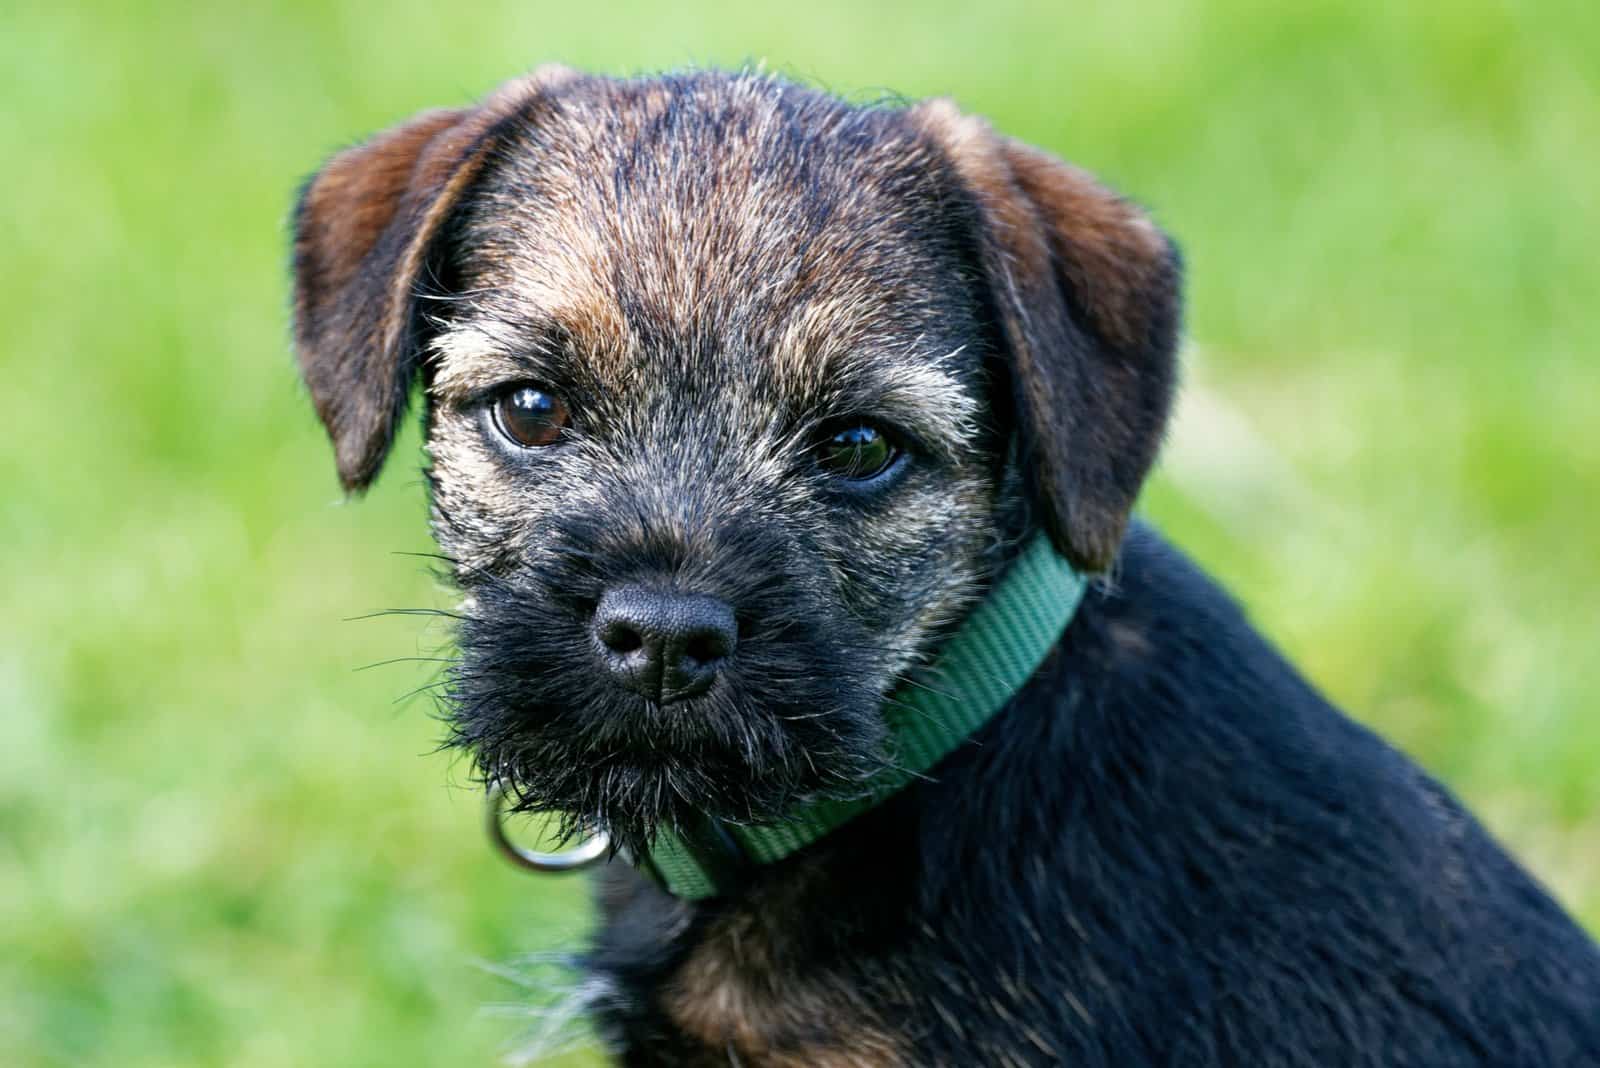 Border Terrier 12 week old puppy sitting outdoors